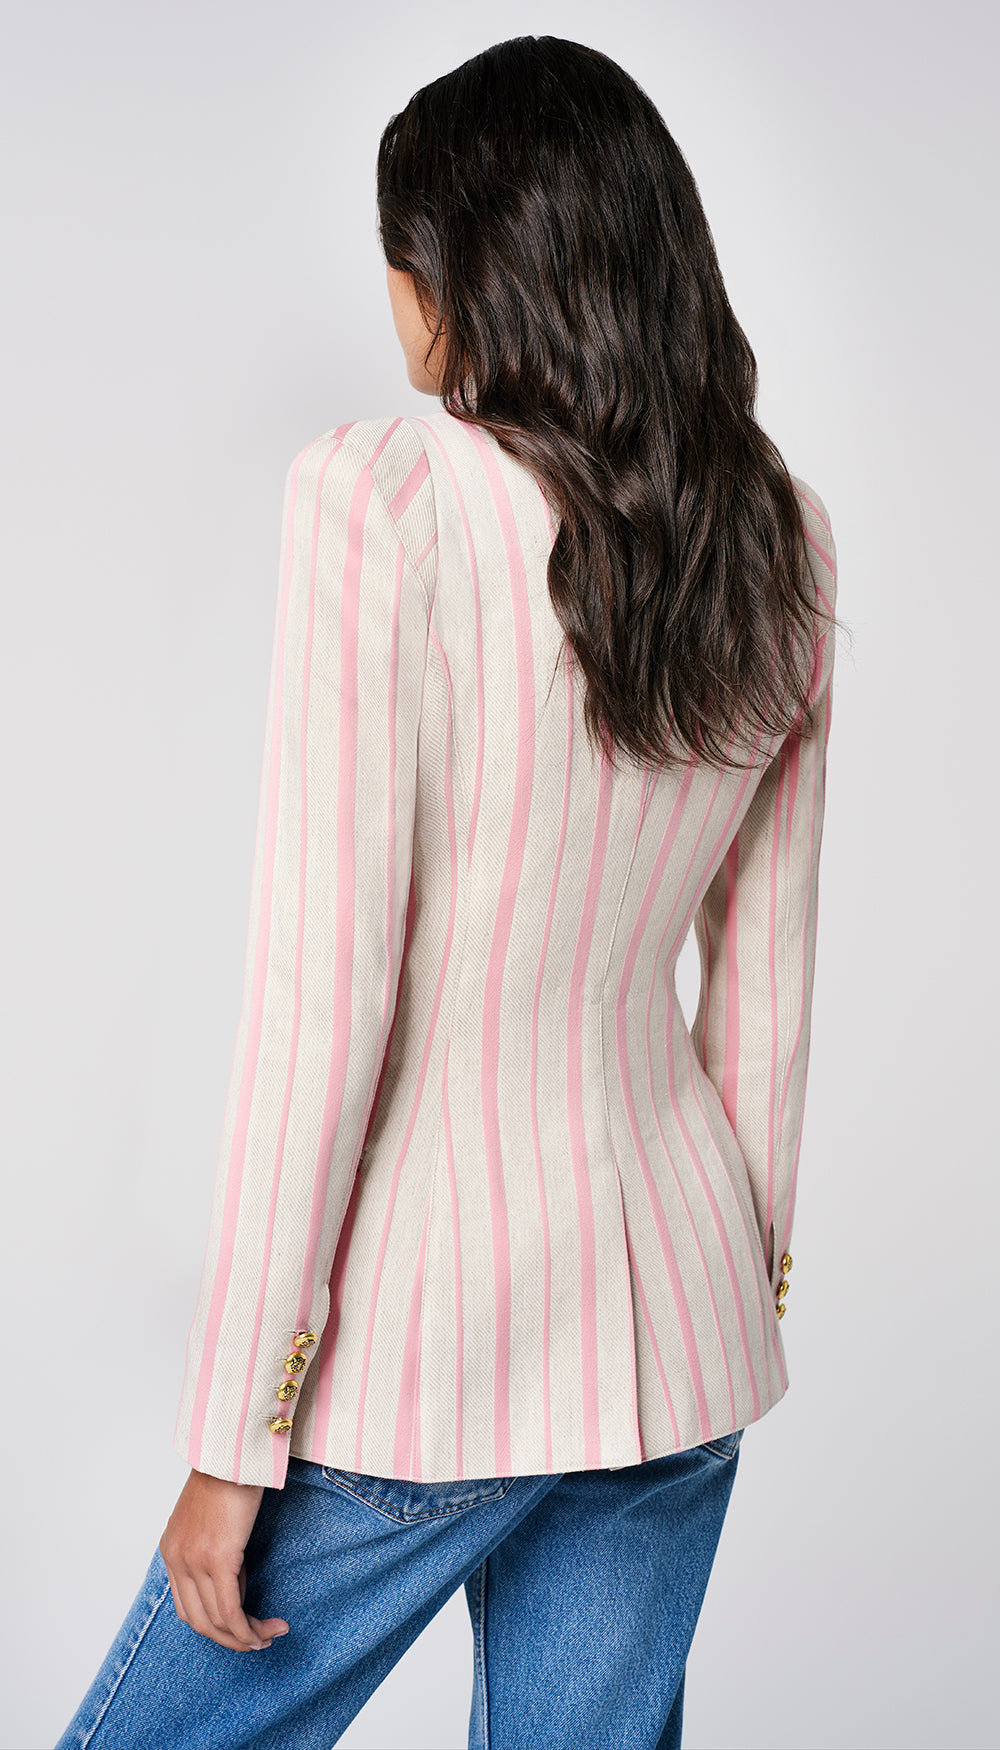 The back of a woman in a stone and rose stripe blazer.